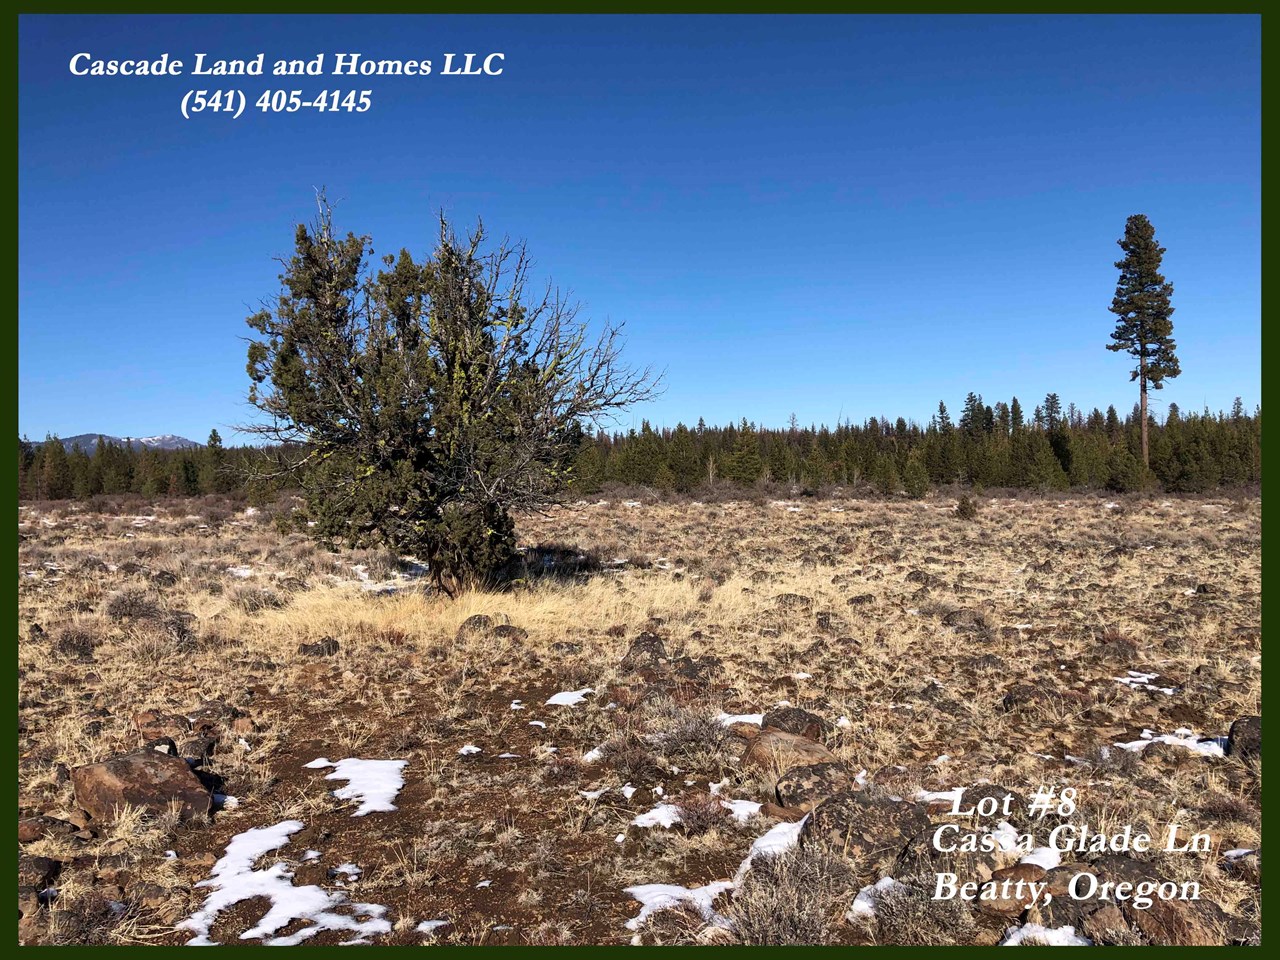 this rural oregon property sits high in the mountains adjoining the freemont-winema national forest. it sits at 4,885 feet and is mostly flat. the parcel next to this one is also for sale from the same owner! make an offer on both and have a large 3.5~acre property to call your own! this would be a great spot for a base camp, family get away spot or possibly an off-grid homesite! even though it does get cold in the winters, the area gets almost 300 days of sunshine, so many people here successfully opt for solar power! with the national forest adjoining the property, you could step out your backdoor and have thousands of pristine wilderness to explore!